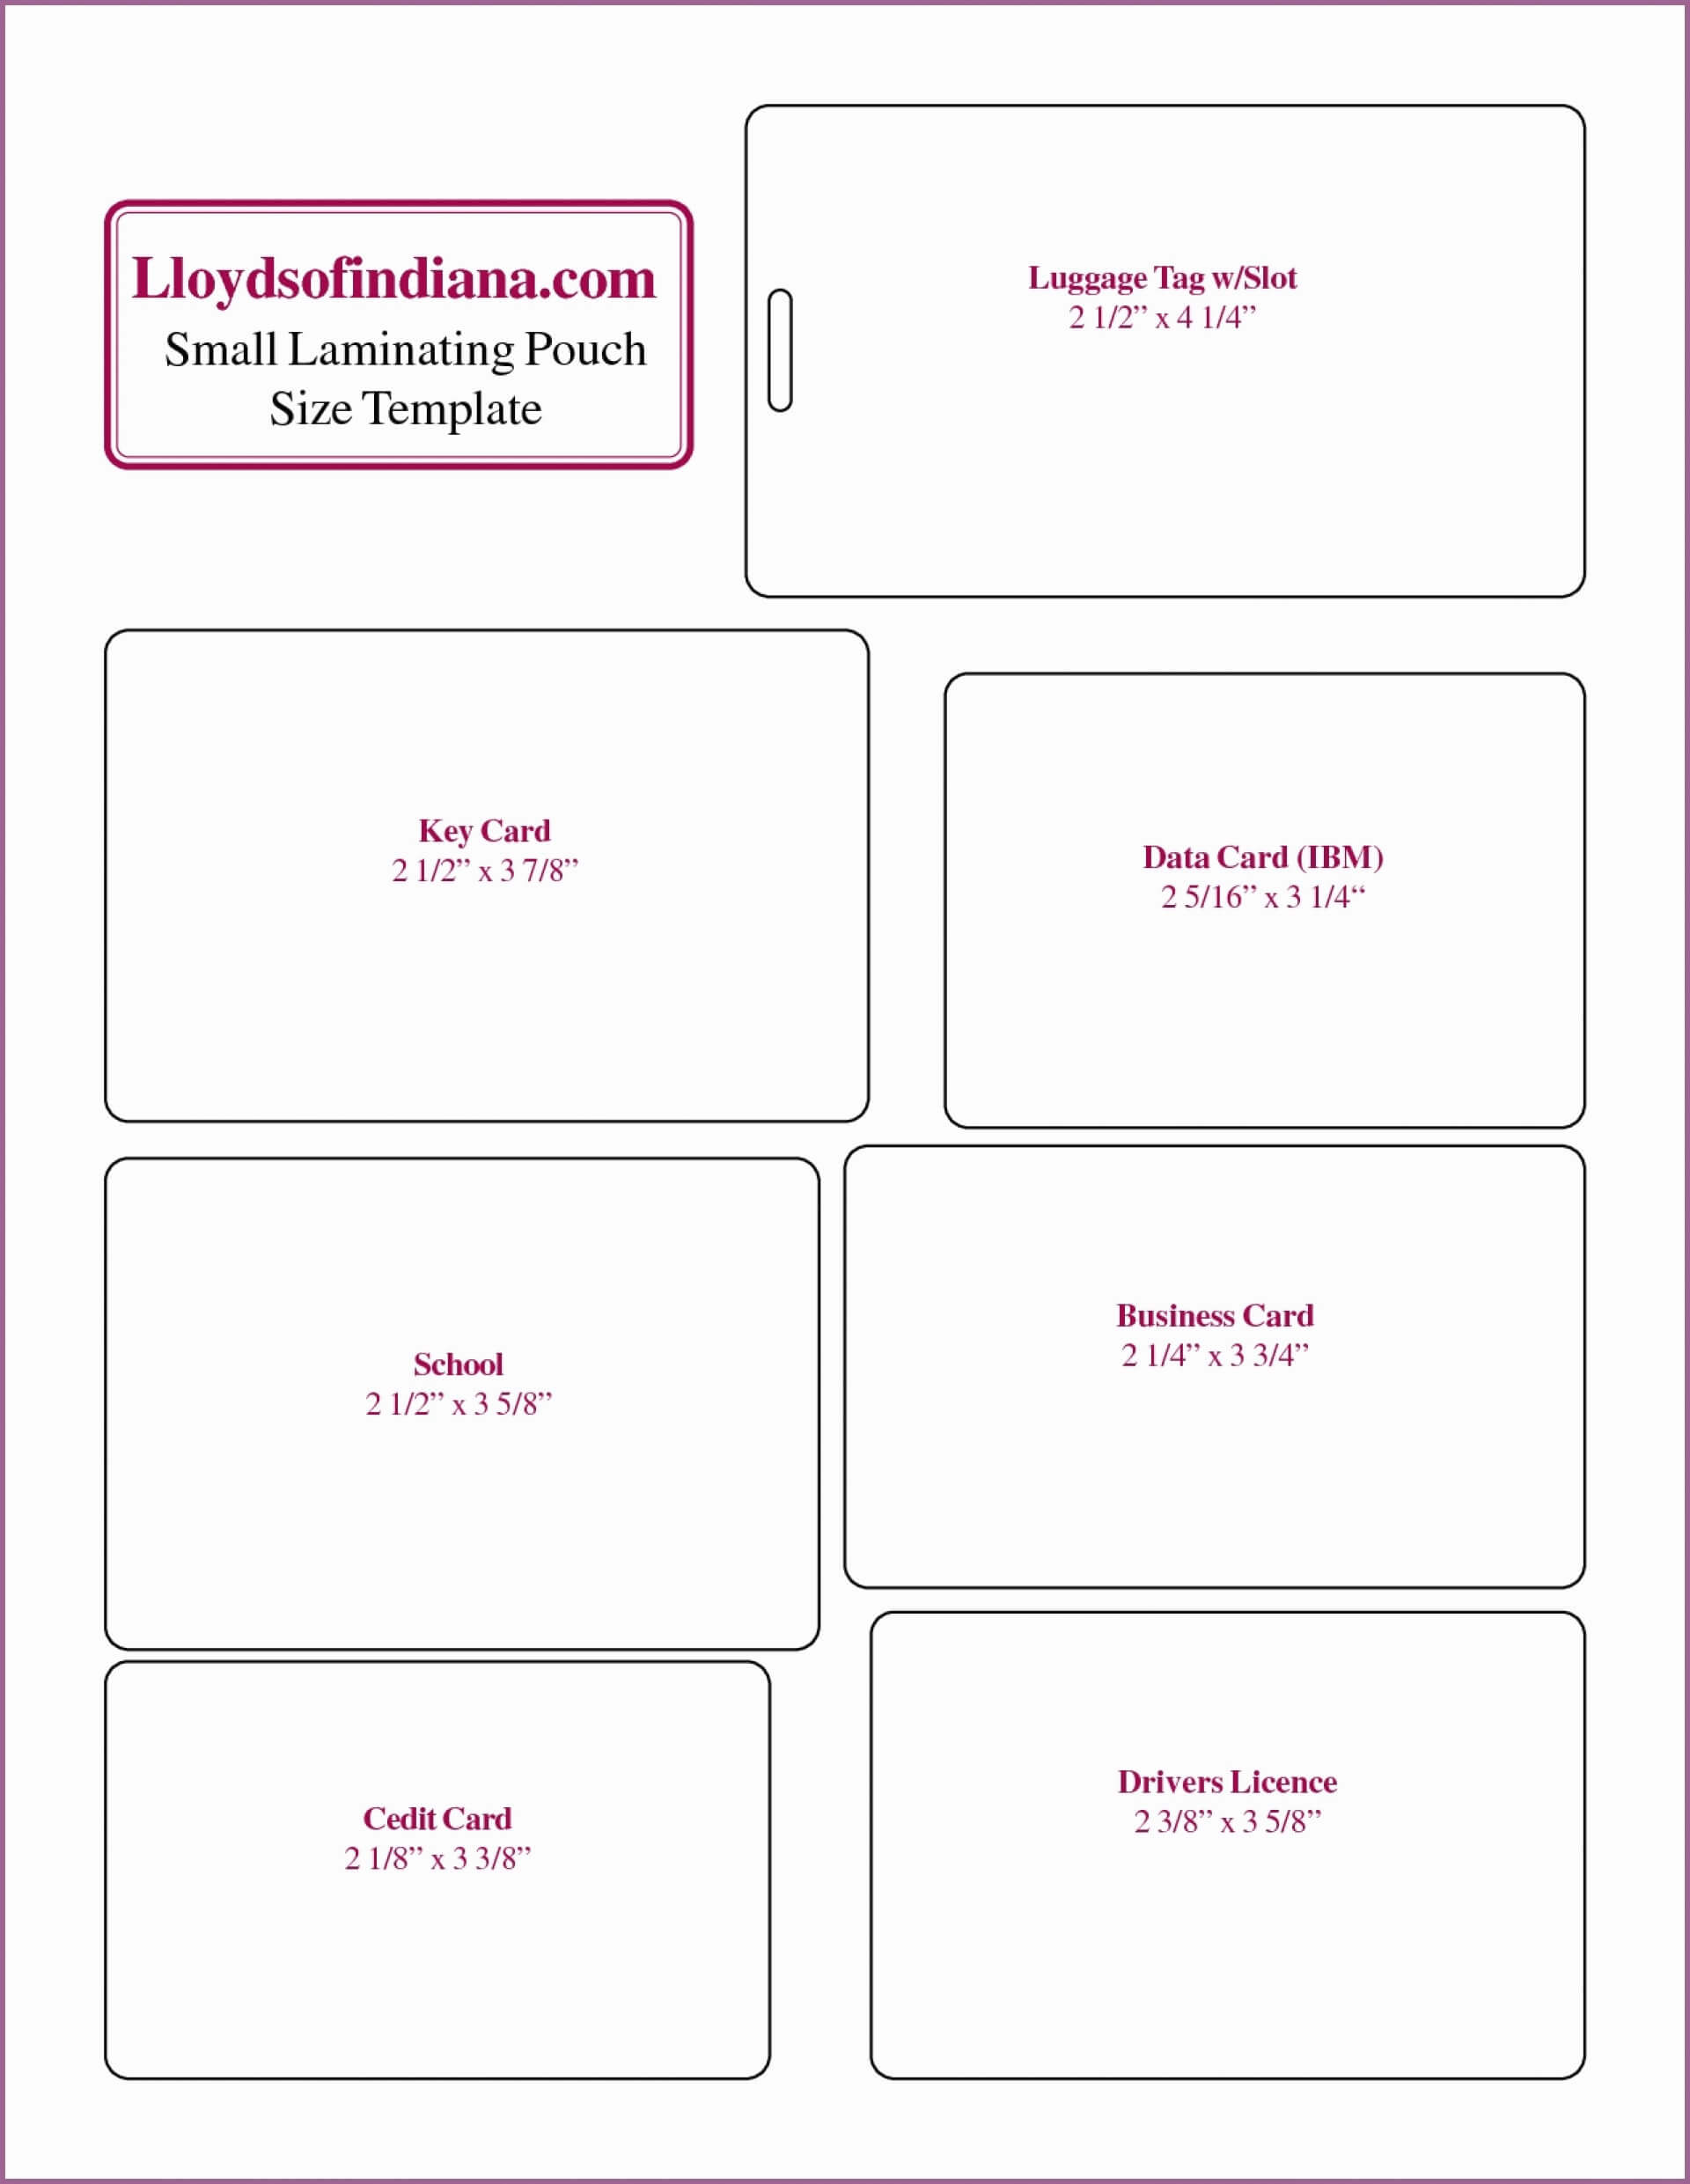 Luggage Tag Template Word Five Reasons You Should Fall In Pertaining To Luggage Tag Template Word